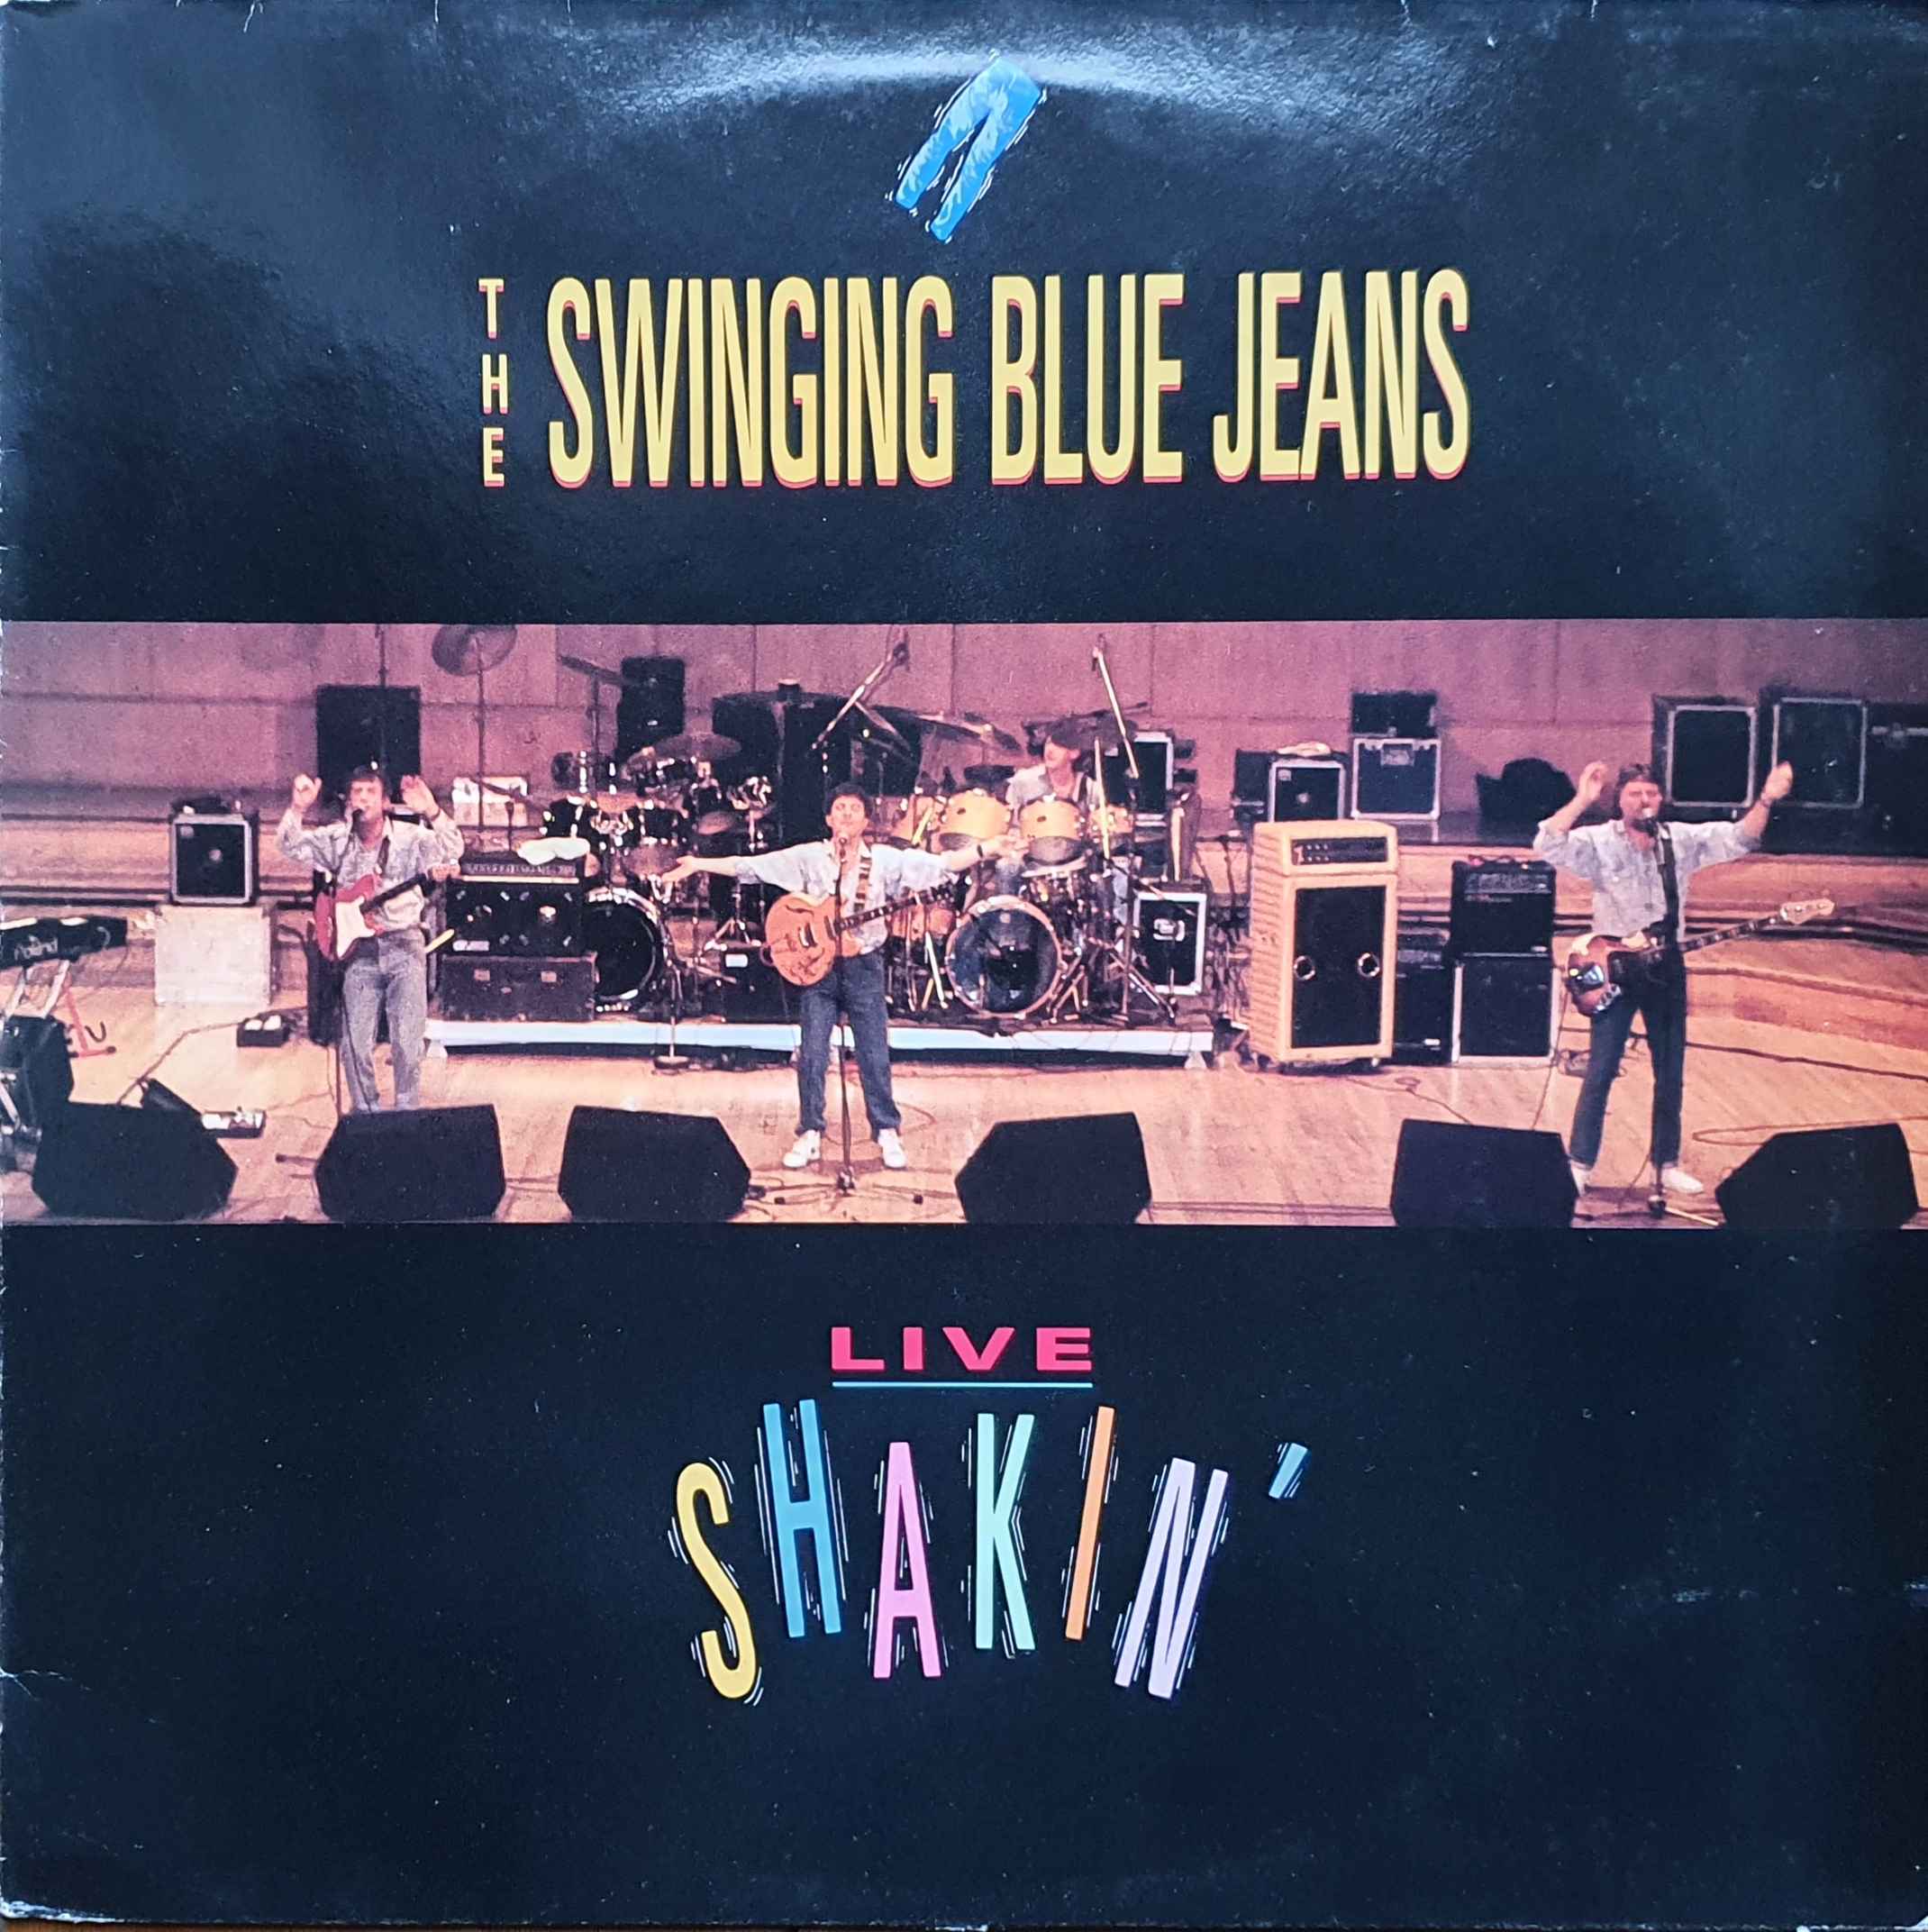 Picture of PRST 502 Live shakin' by artist Swinging Blue Jeans from the BBC albums - Records and Tapes library